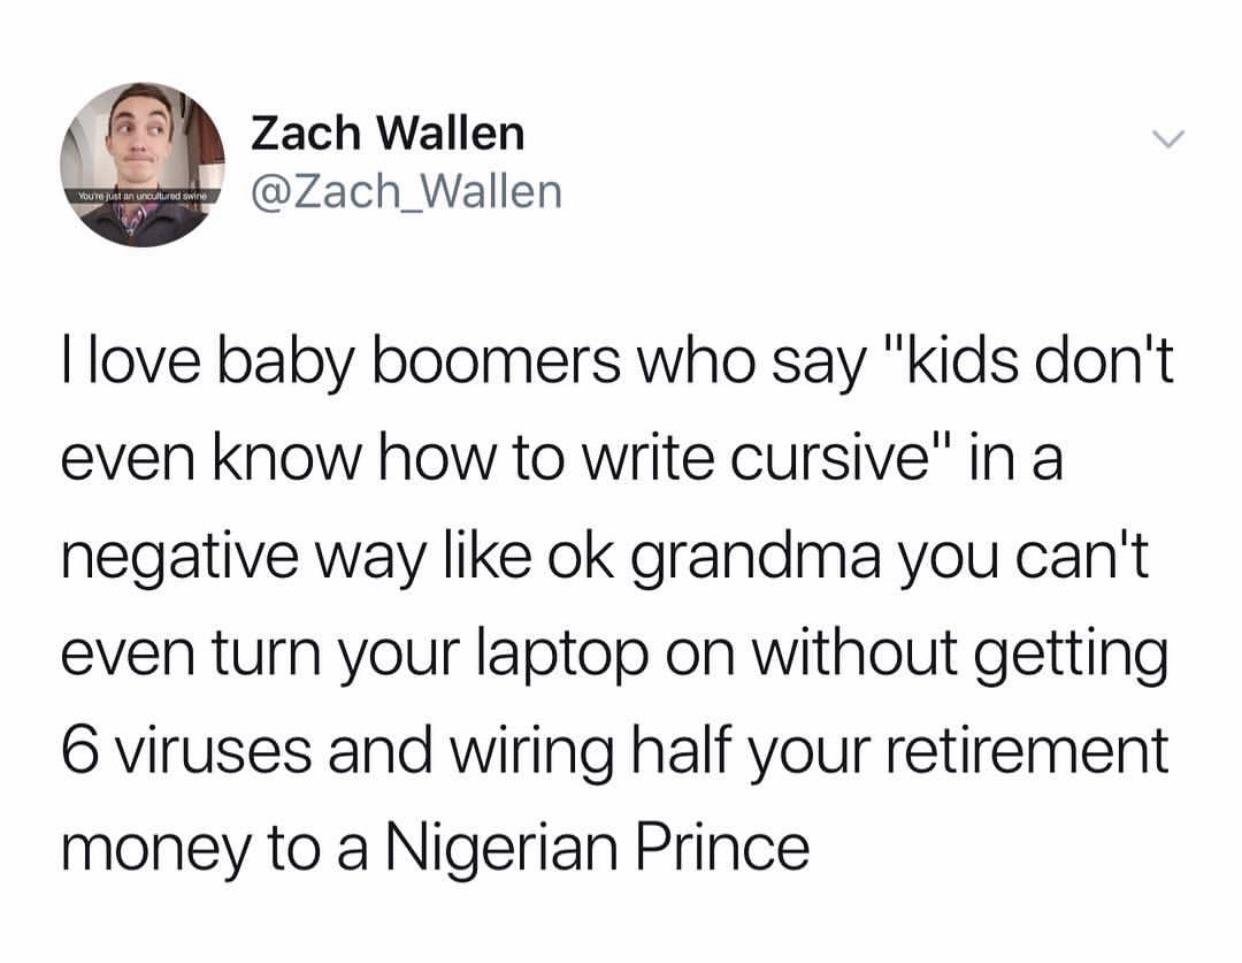 harold they re lesbians - Zach Wallen You To jutan cultured wine I love baby boomers who say "kids don't even know how to write cursive" in a negative way ok grandma you can't even turn your laptop on without getting 6 viruses and wiring half your retirem